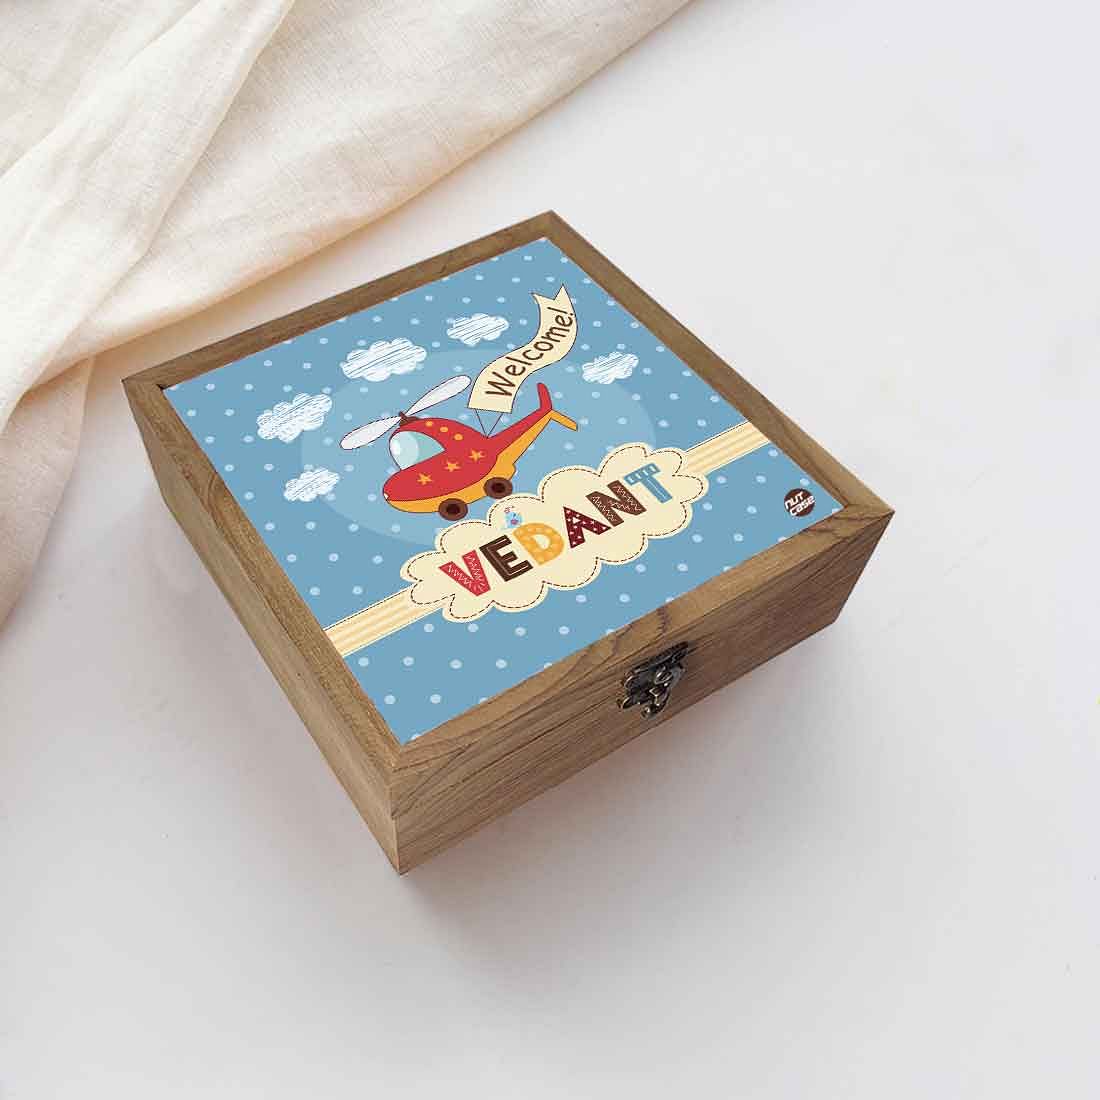 Customized Jewellery India Storage Box for Boy - Helicopter & Clouds Nutcase